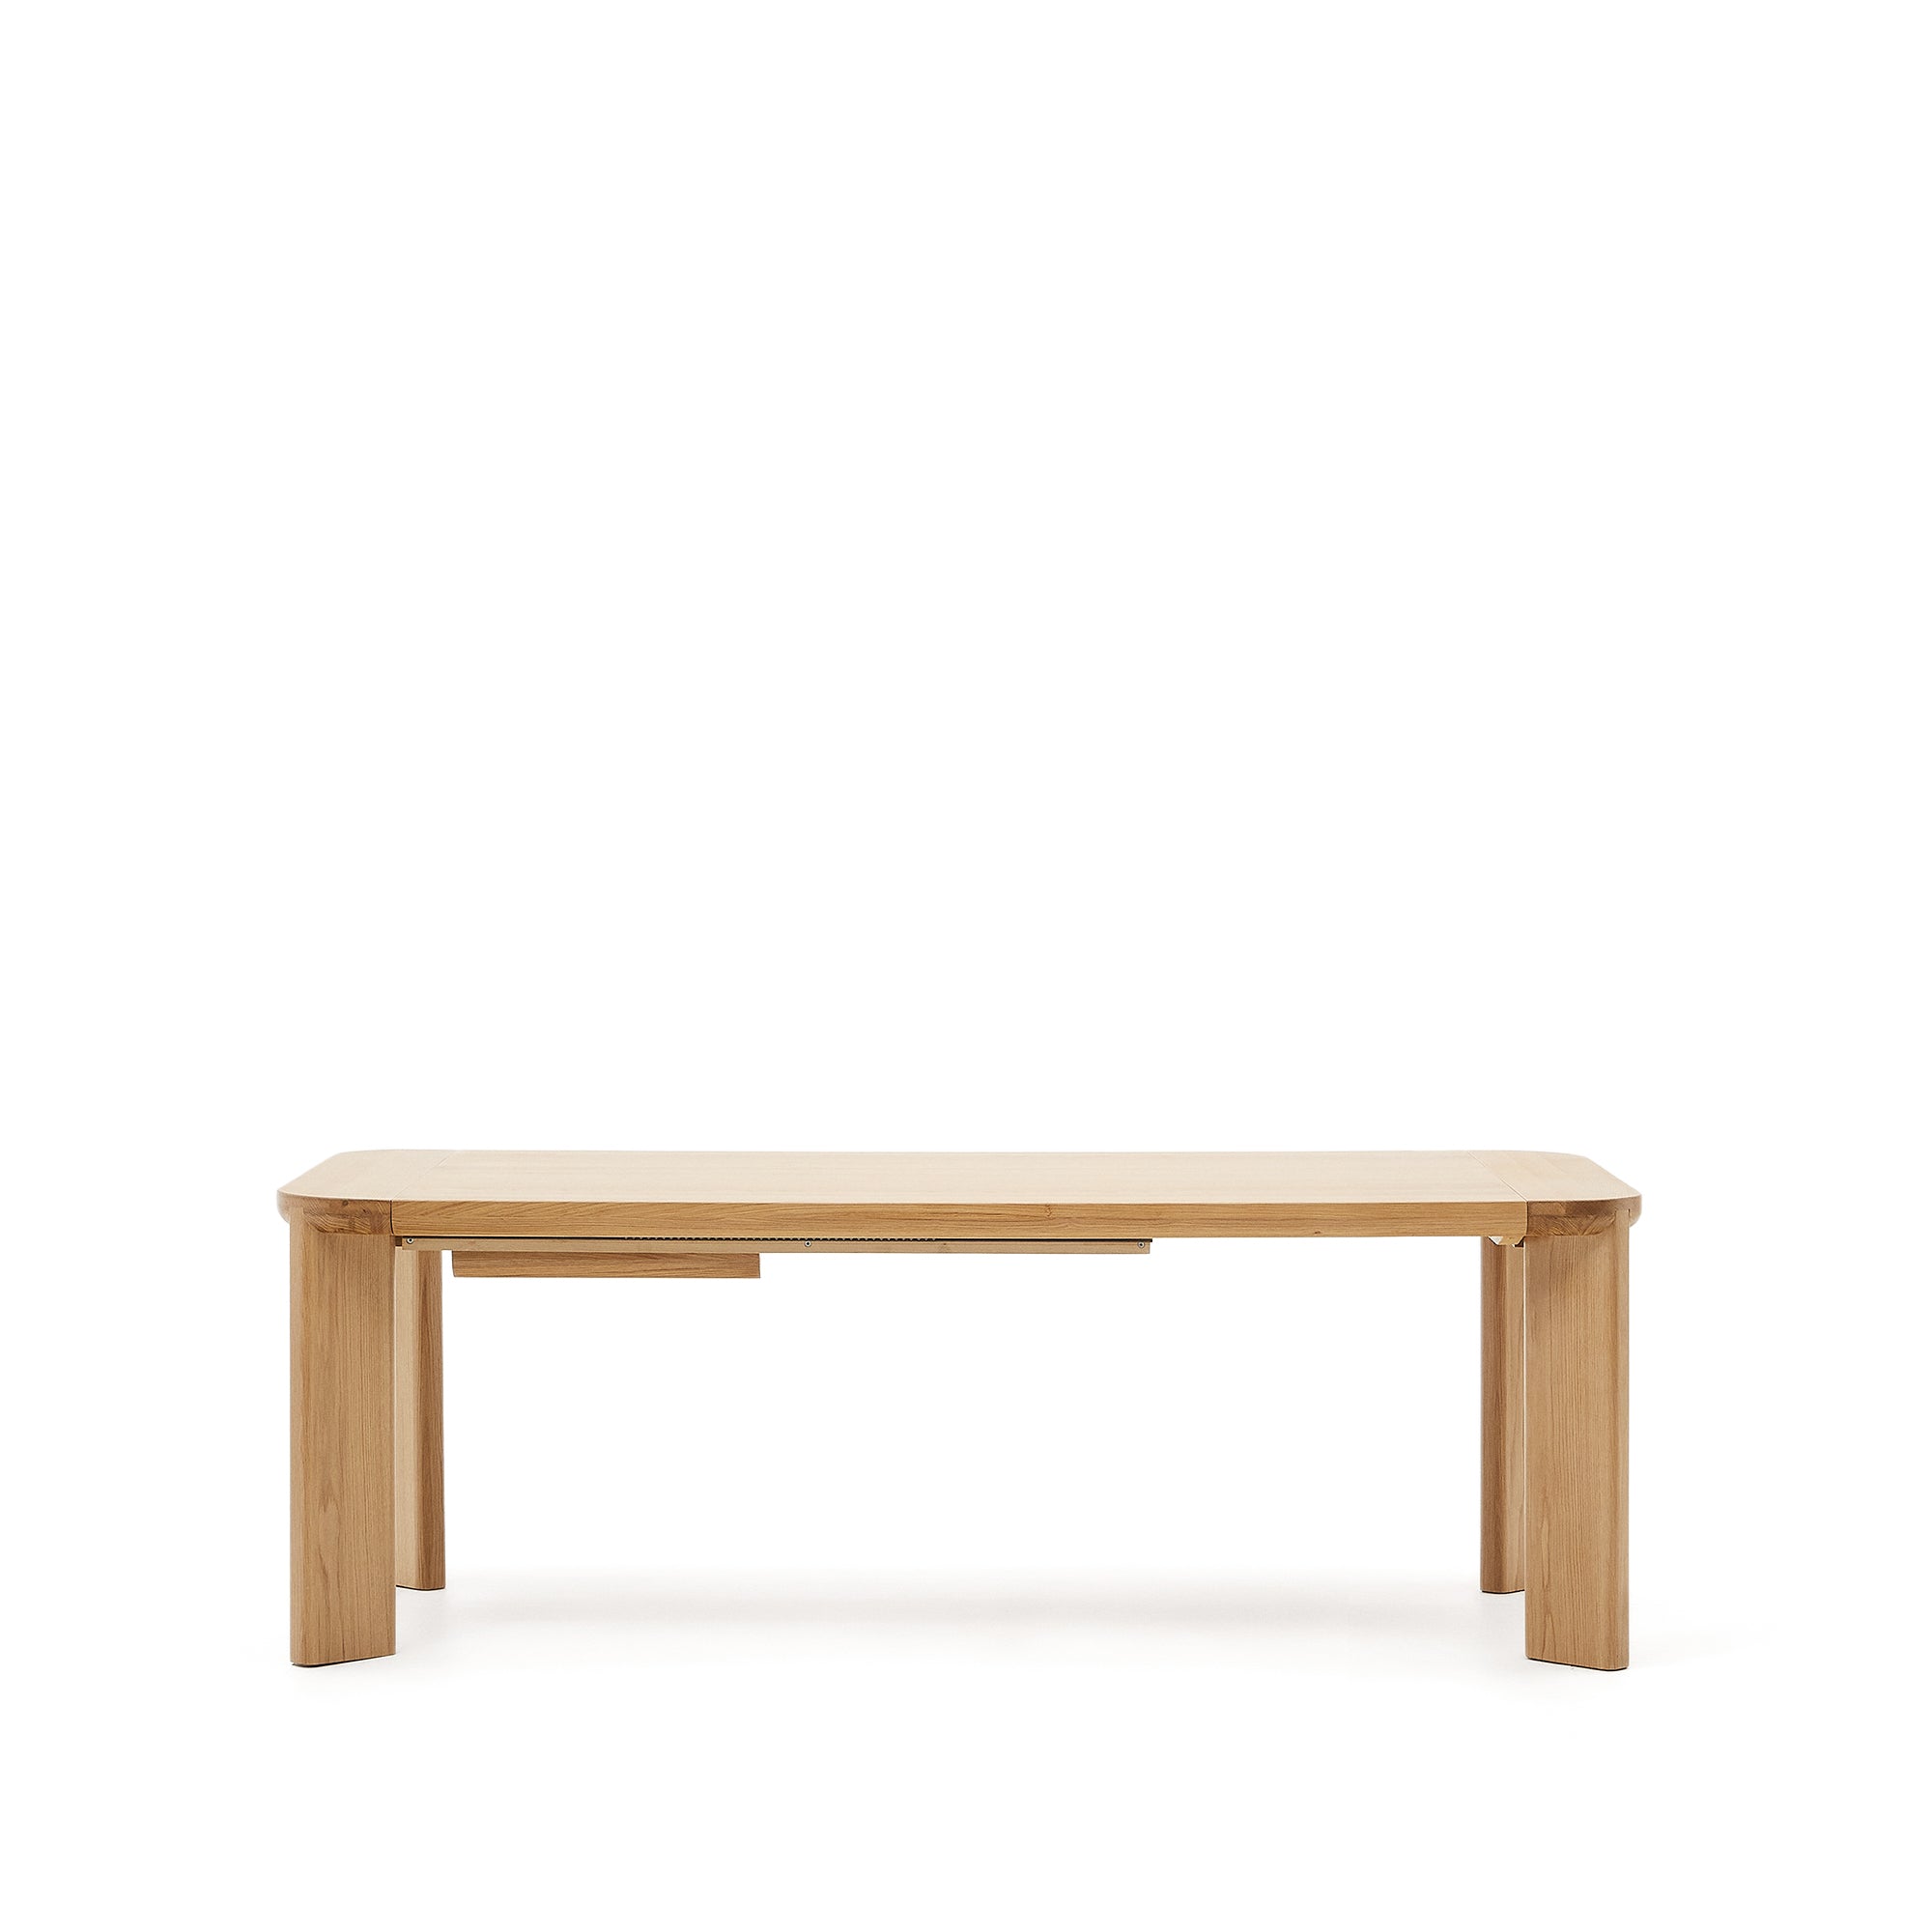 Jondal extendable table, made of solid wood and oak veneer, 100% FSC, 200 (280) cm x 100 cm